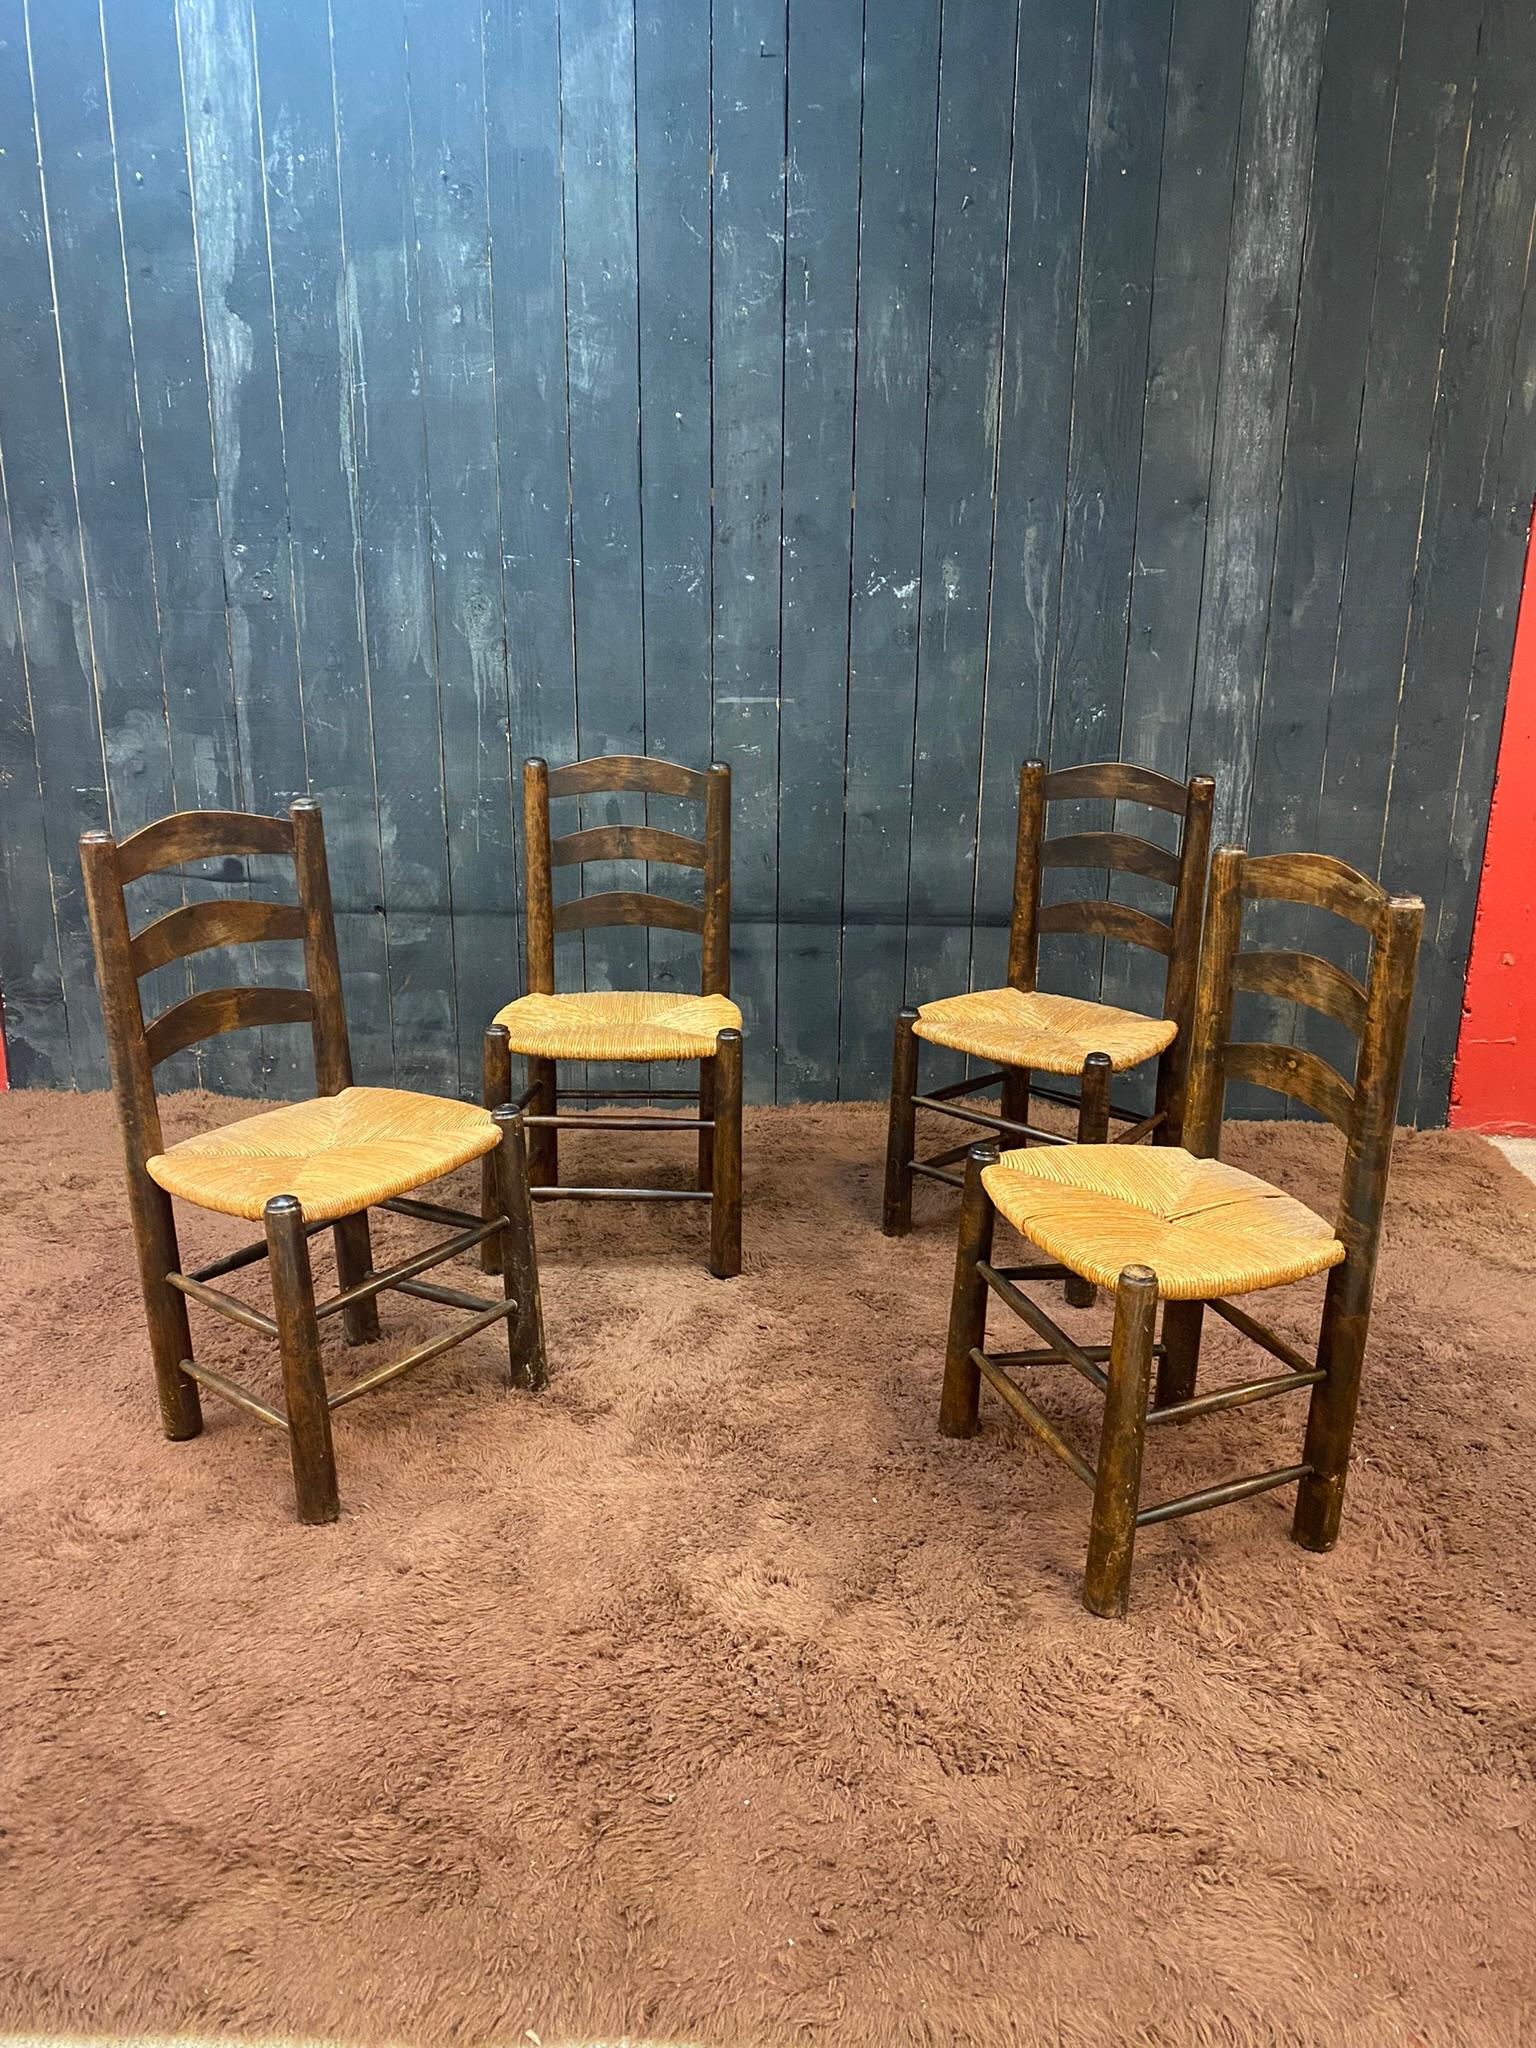 4 Brutalist pine chairs, circa 1950.
1 table offered in another ad.